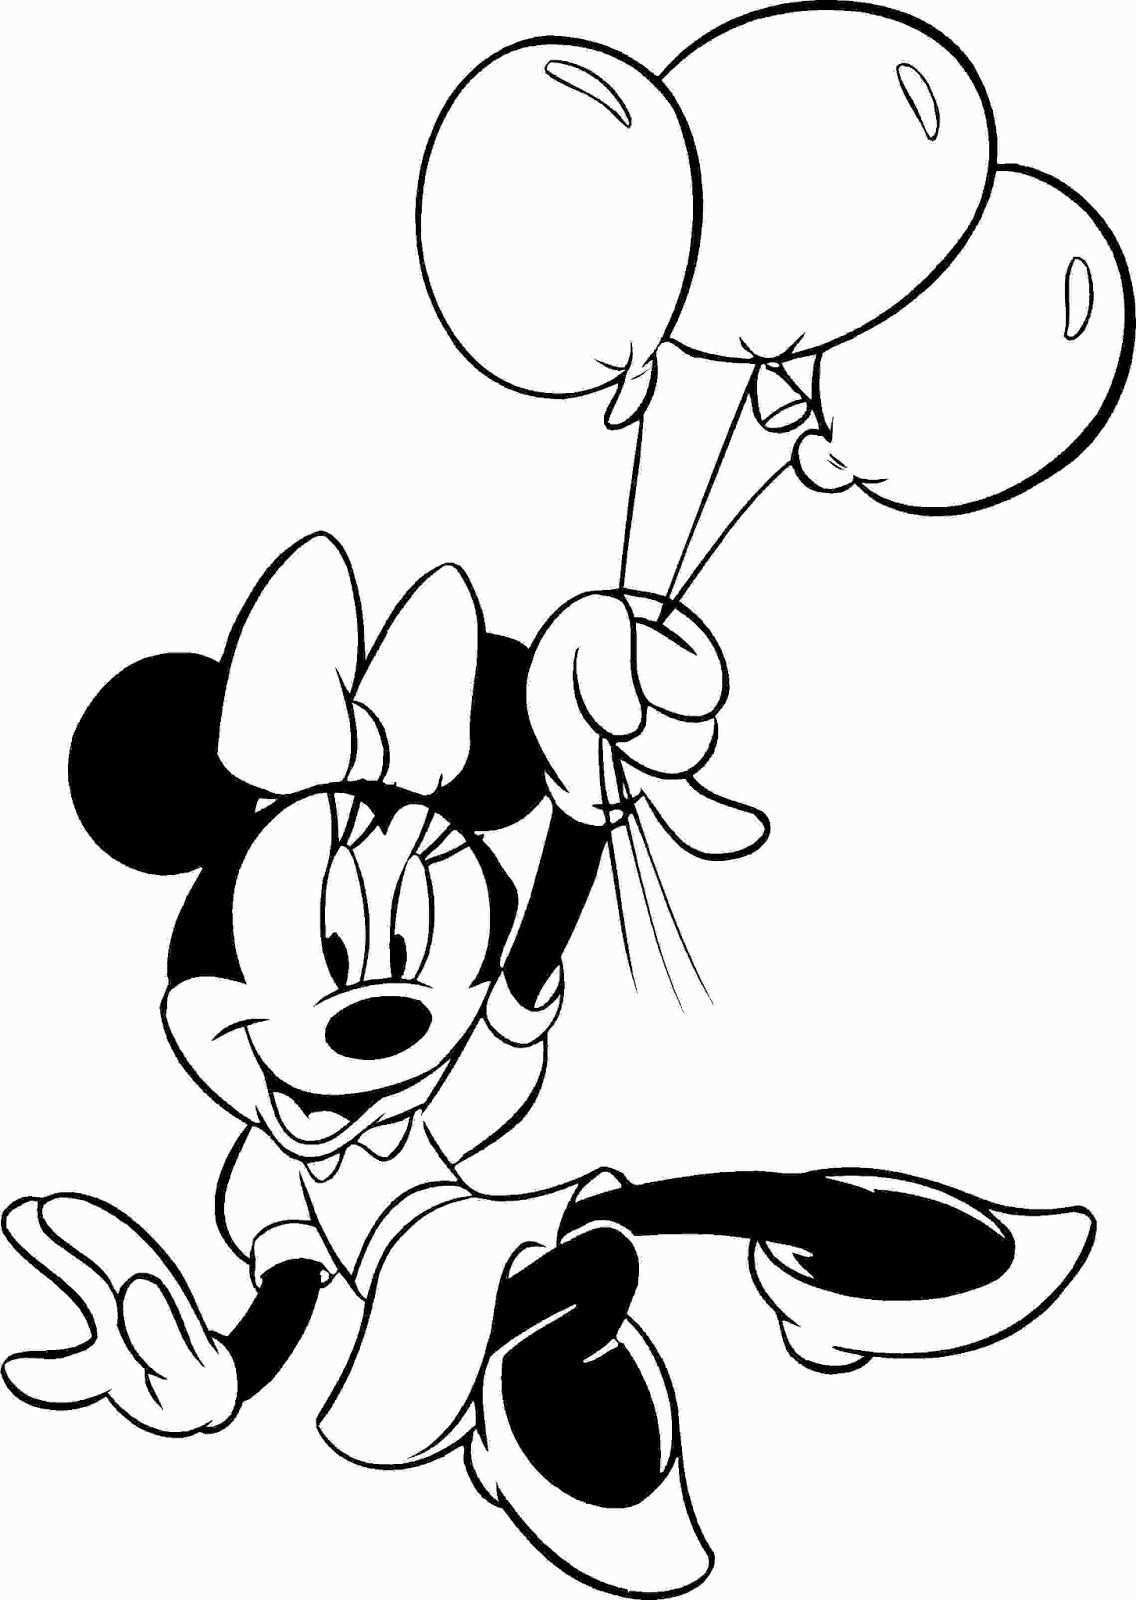 Mini Cooper Coloring Pages Best Of Mini Coloring Pages At Getcolorings Minnie Mouse C